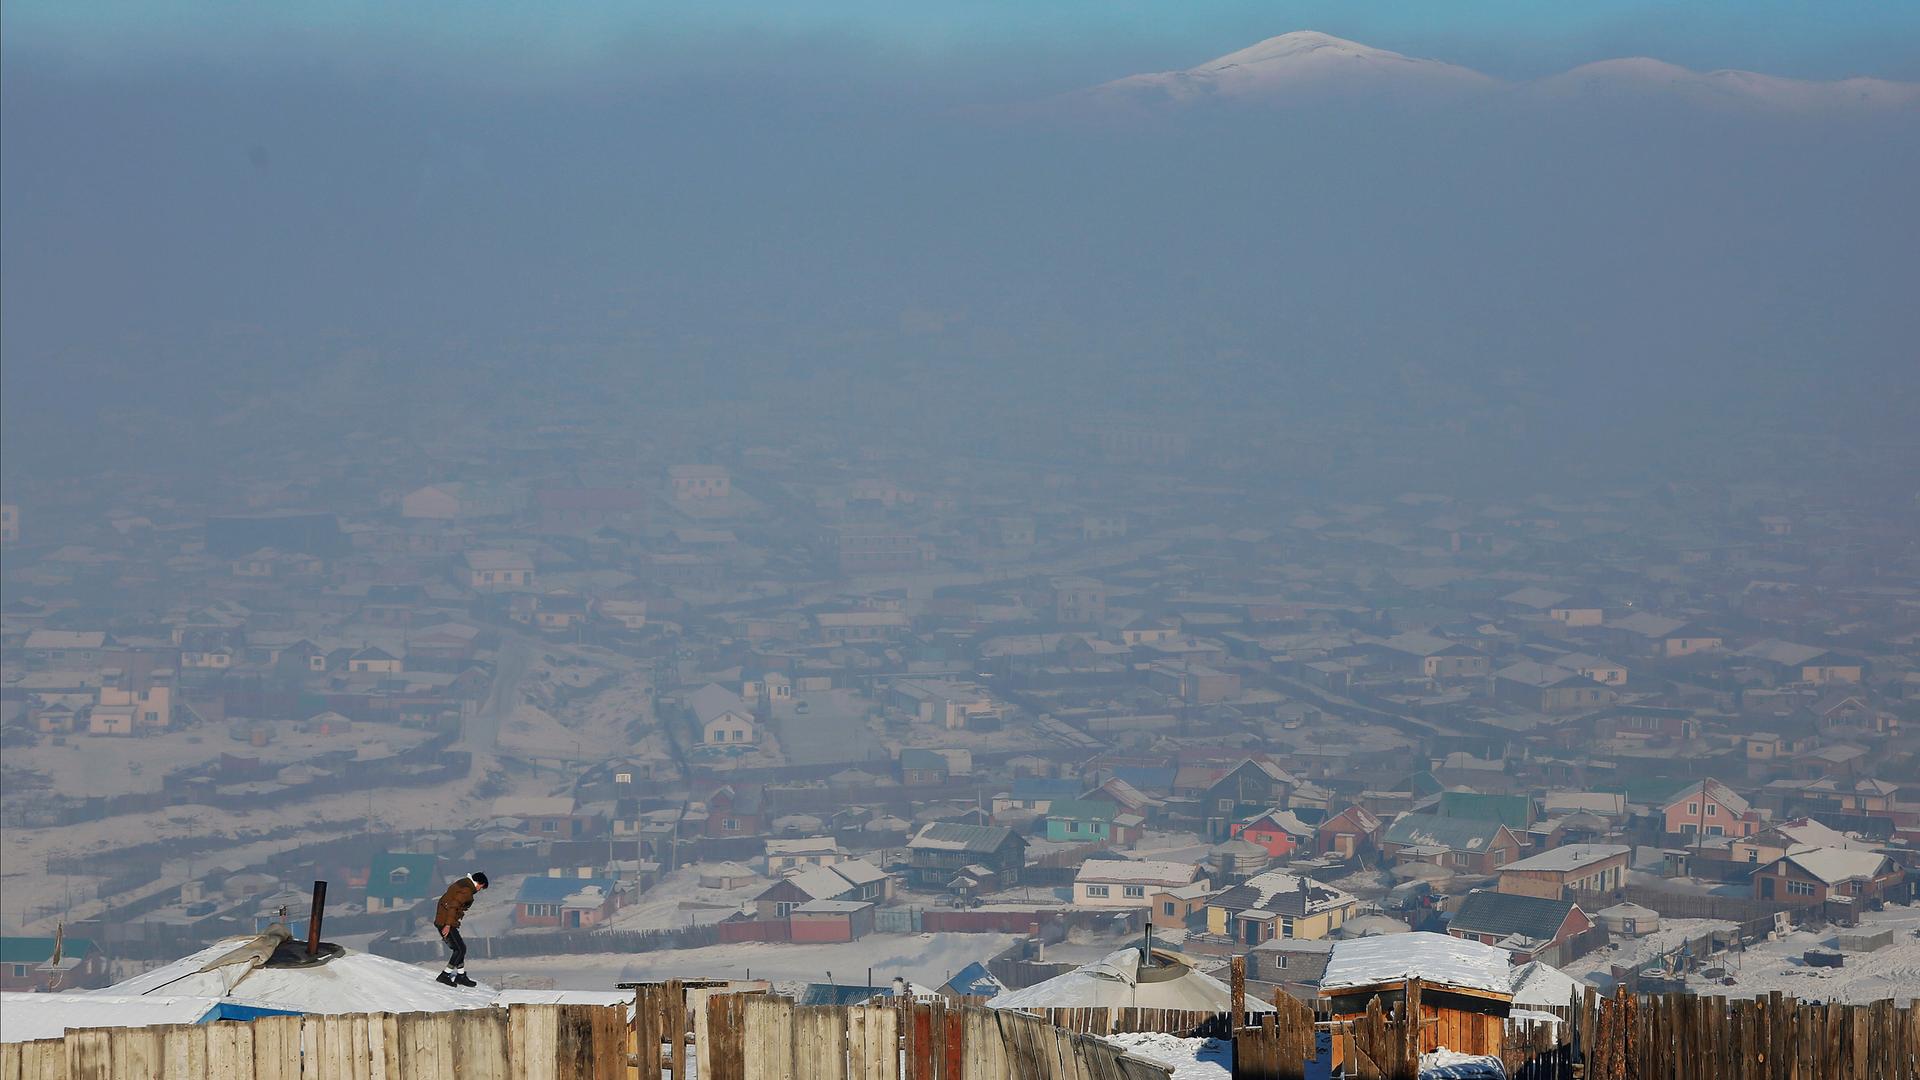 A man walks on the roof of a traditional ger home while fixing the chimney of a coal burning stove on a cold hazy day on the outskirts of Ulaanbaatar, Mongolia.